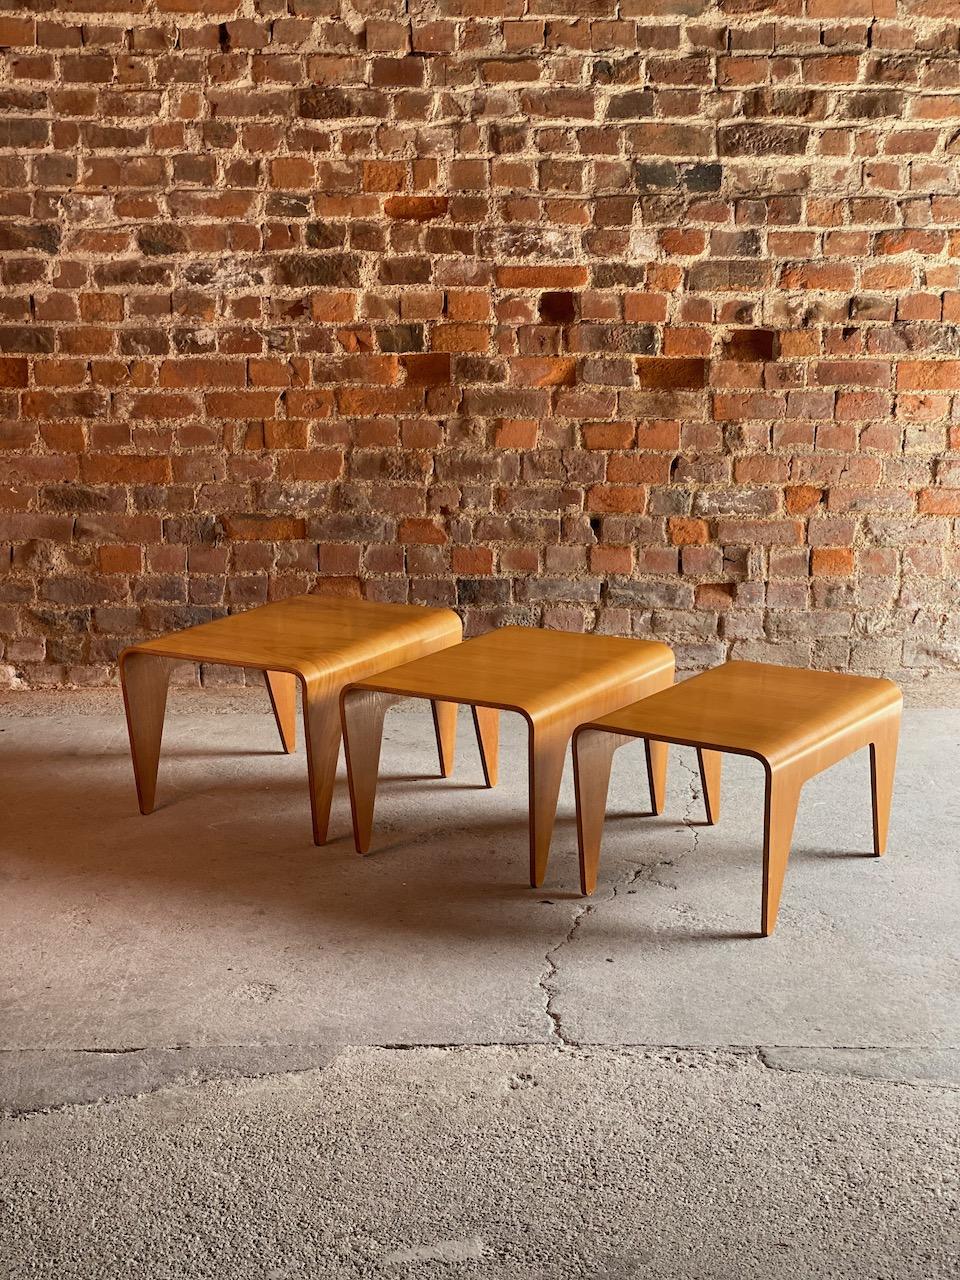 Marcel Breuer for Isokon set of three nesting tables made from beech plywood, designed circa 1936, the tables have just been fully restored and are offered in superb condition with only minor wear.

Midcentury
Marcel Breuer
Isokon
1936